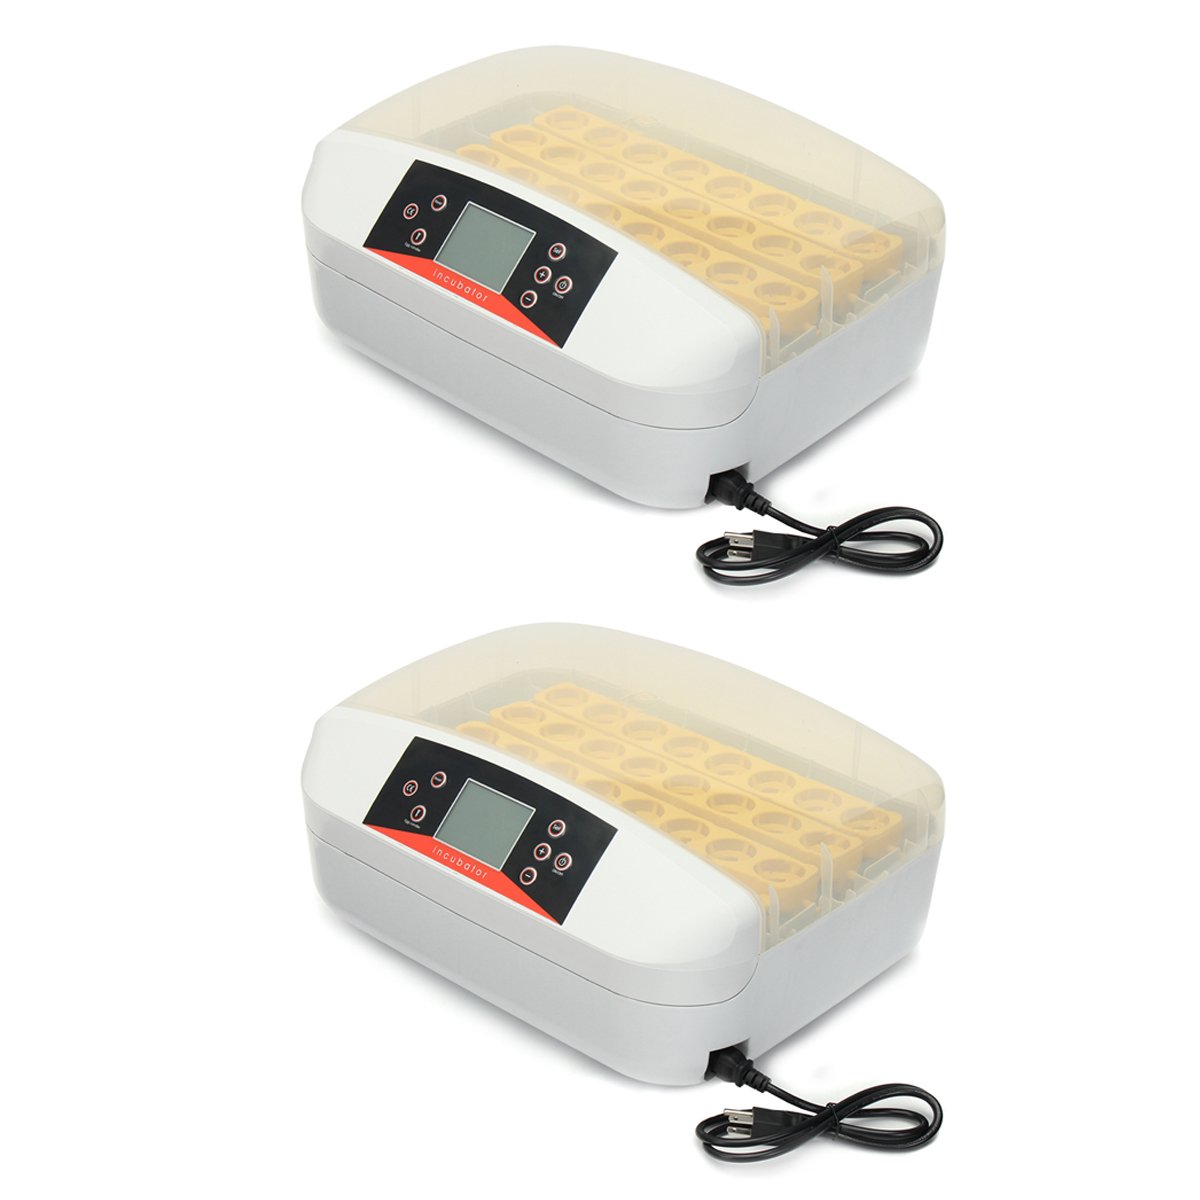 32 Position Electronic Digital Incubator Automatic Hatcher for Poultry Eggs Chicken Egg 2